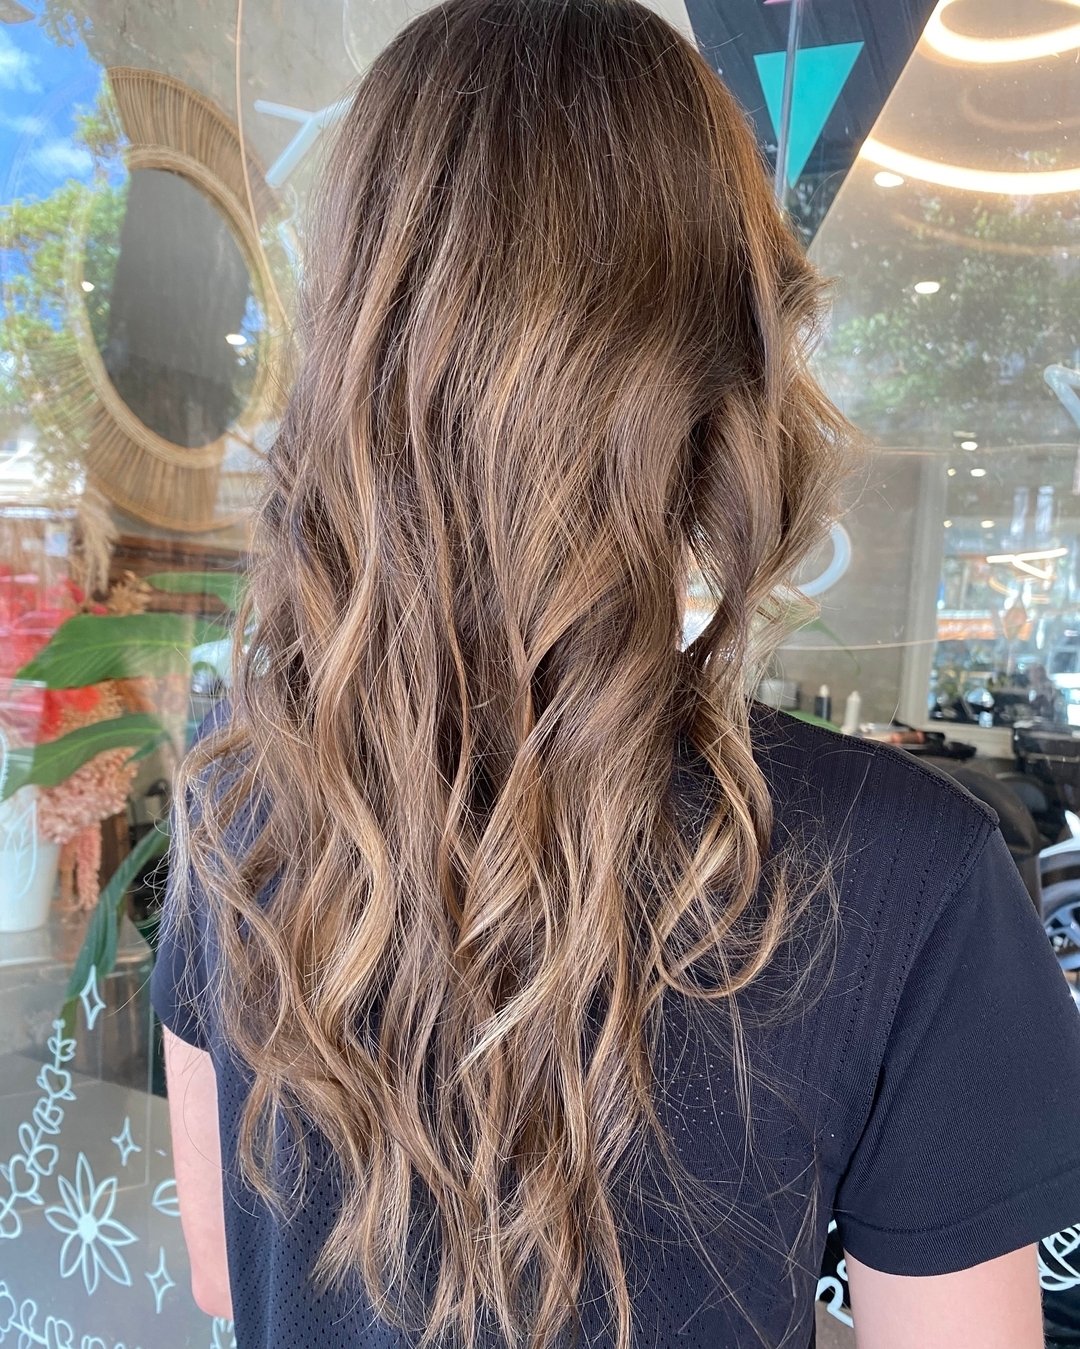 🌈 what are partial highlights? 🌈 partial highlights unlike a half or full head are curated sections of lightening throughout the hair to add dimension, complimenting your natural shade 🥰 

Partial highlights are recommended for those wanting a sub